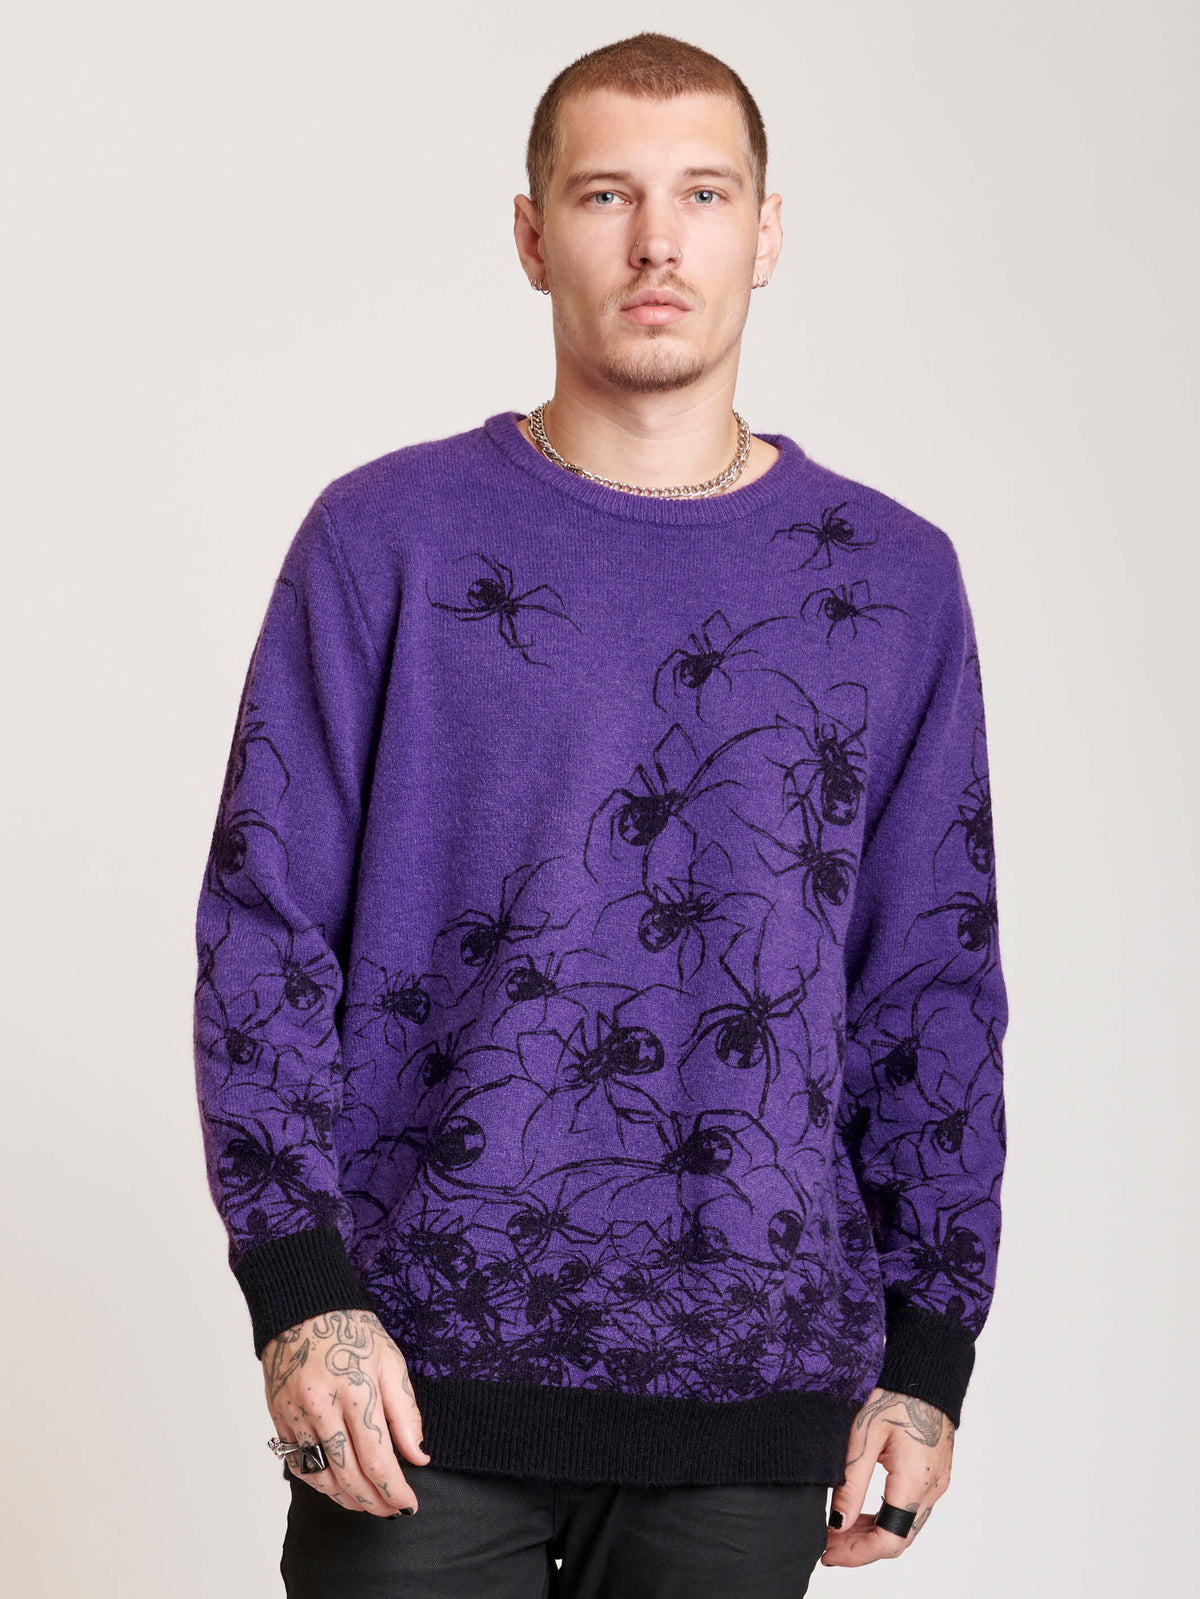  purple sweater with spiders all over